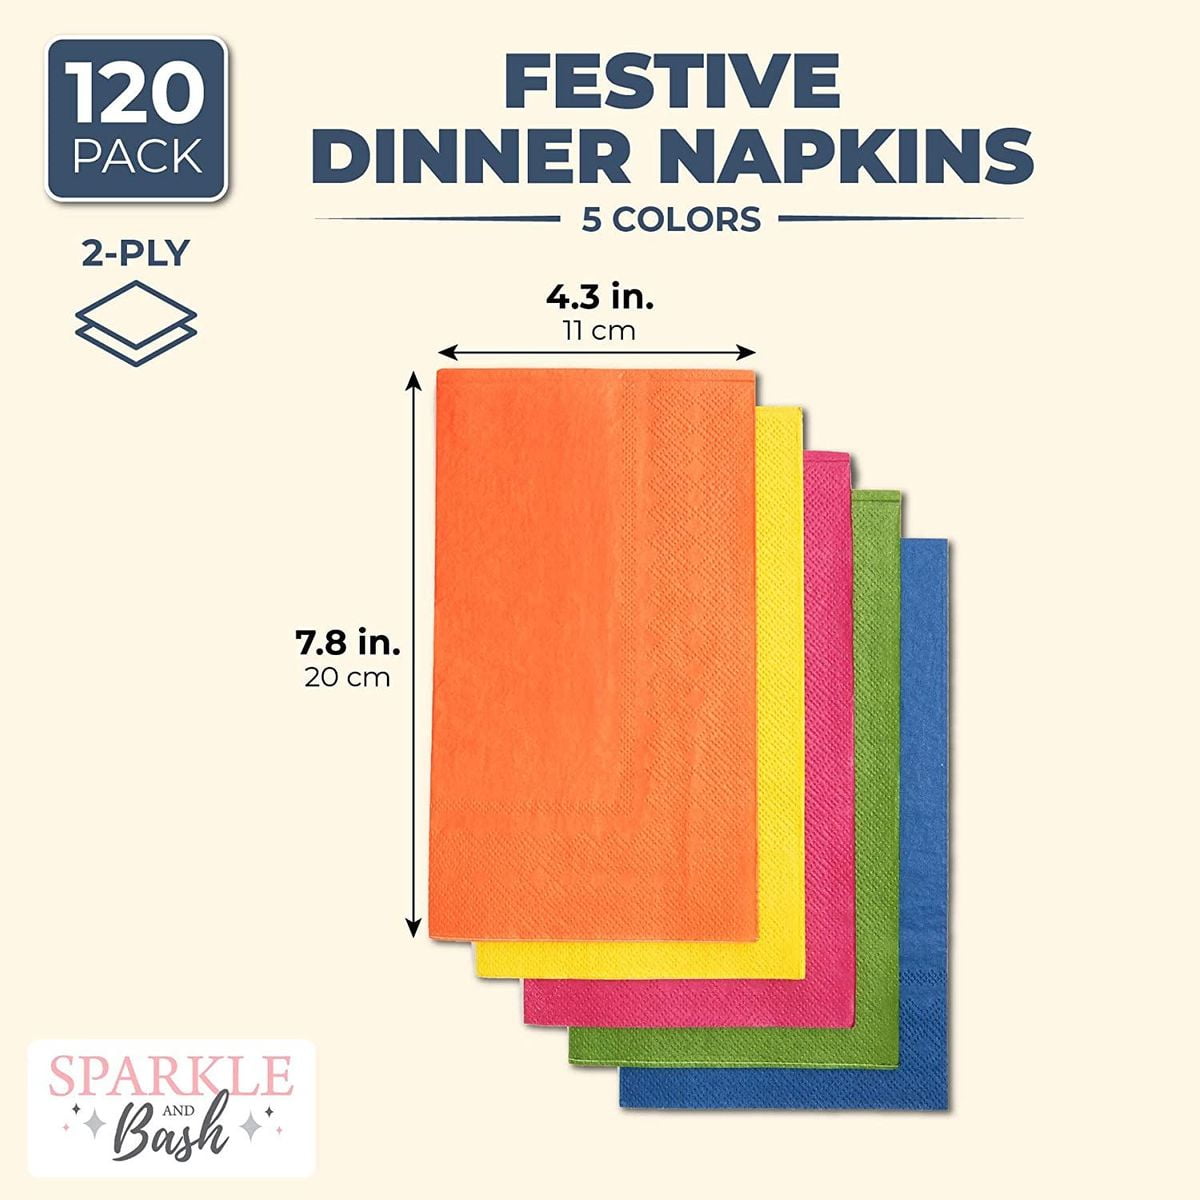 Colorful Dinner Paper Napkins for Parties 4 x 8 Inches, 5 Colors, 120 Pack 